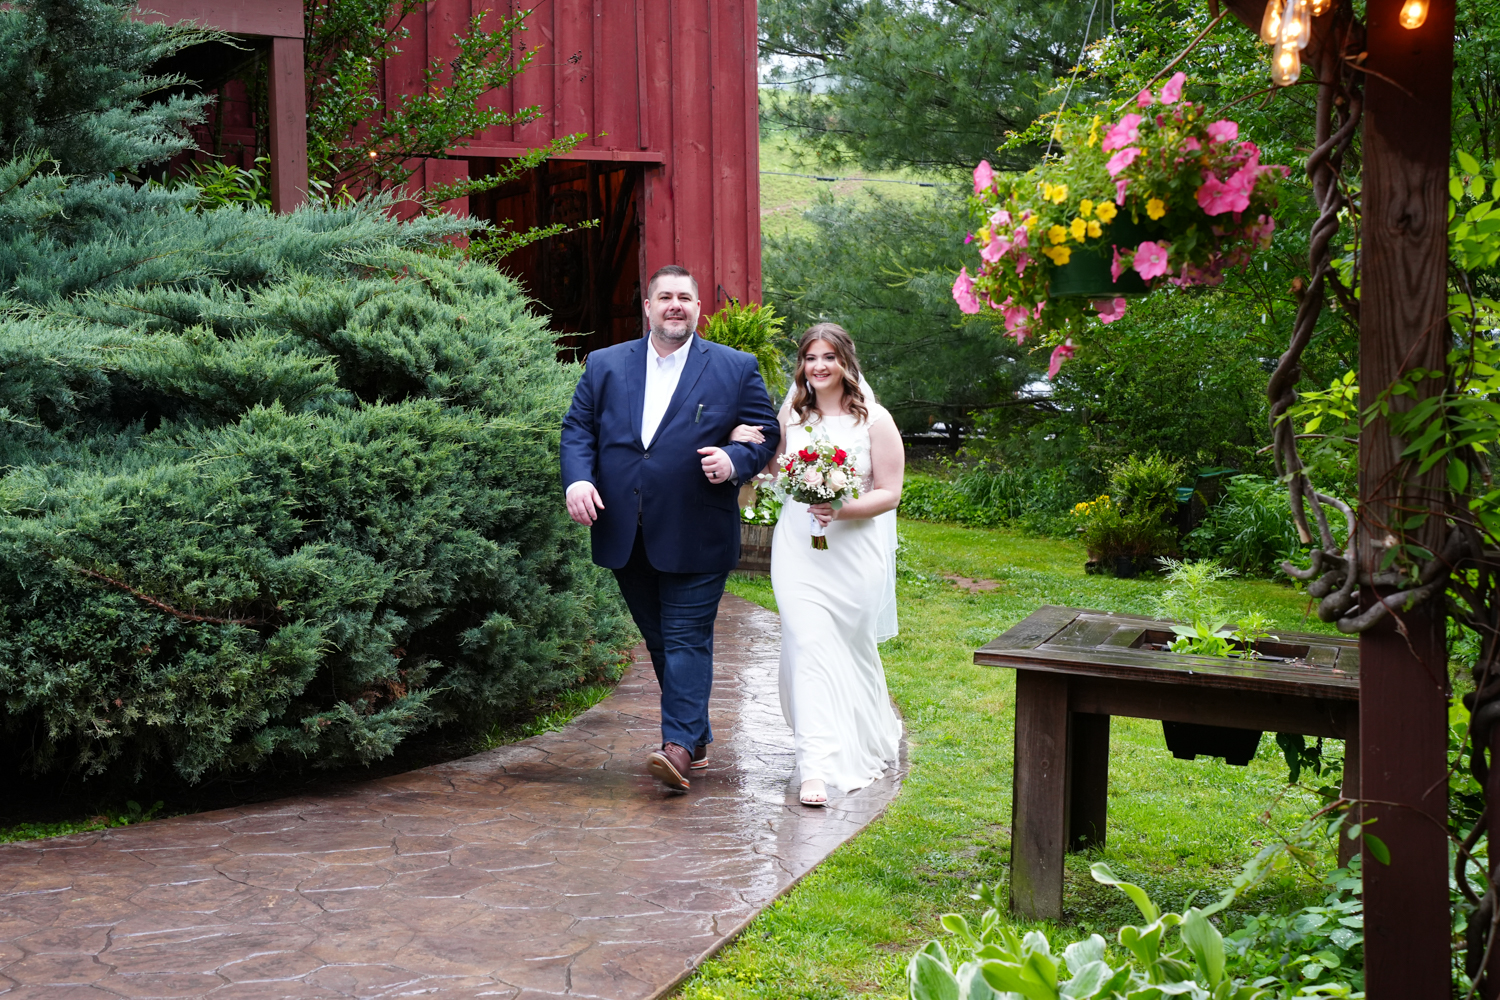 father walking his daughter along a sidewalk from a red barn in a garden